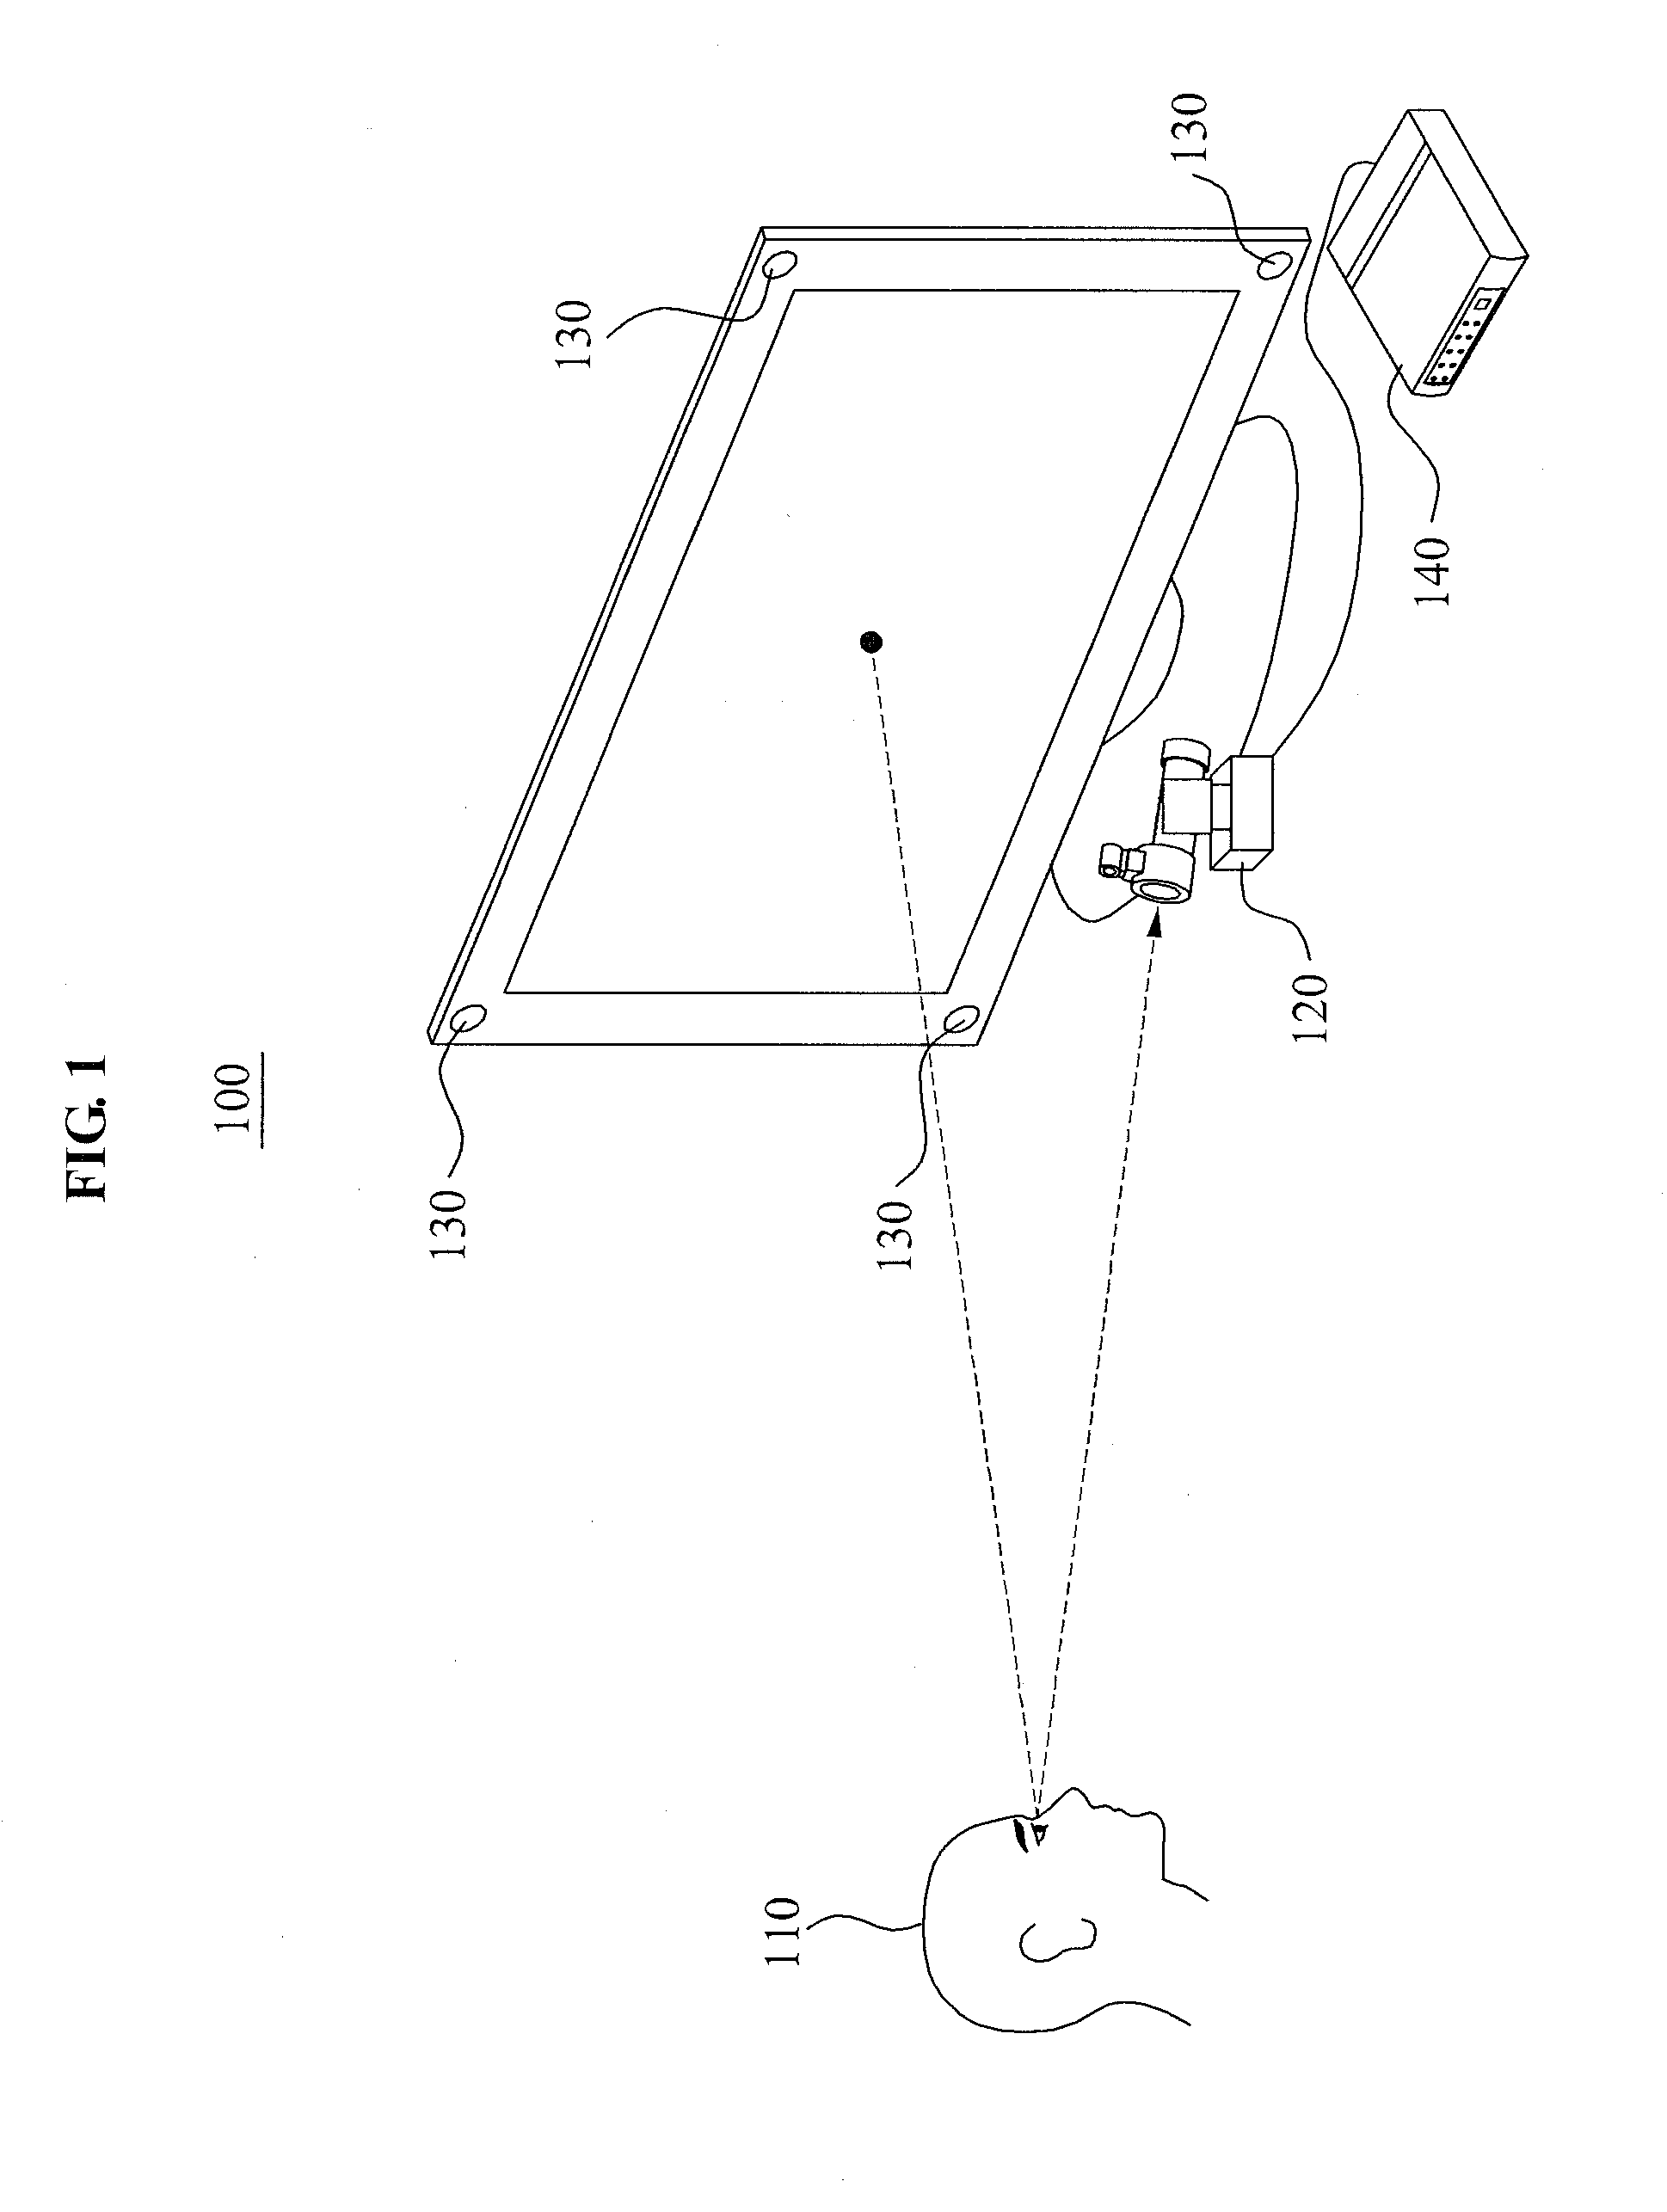 Gaze tracking system and method for controlling internet protocol TV at a distance